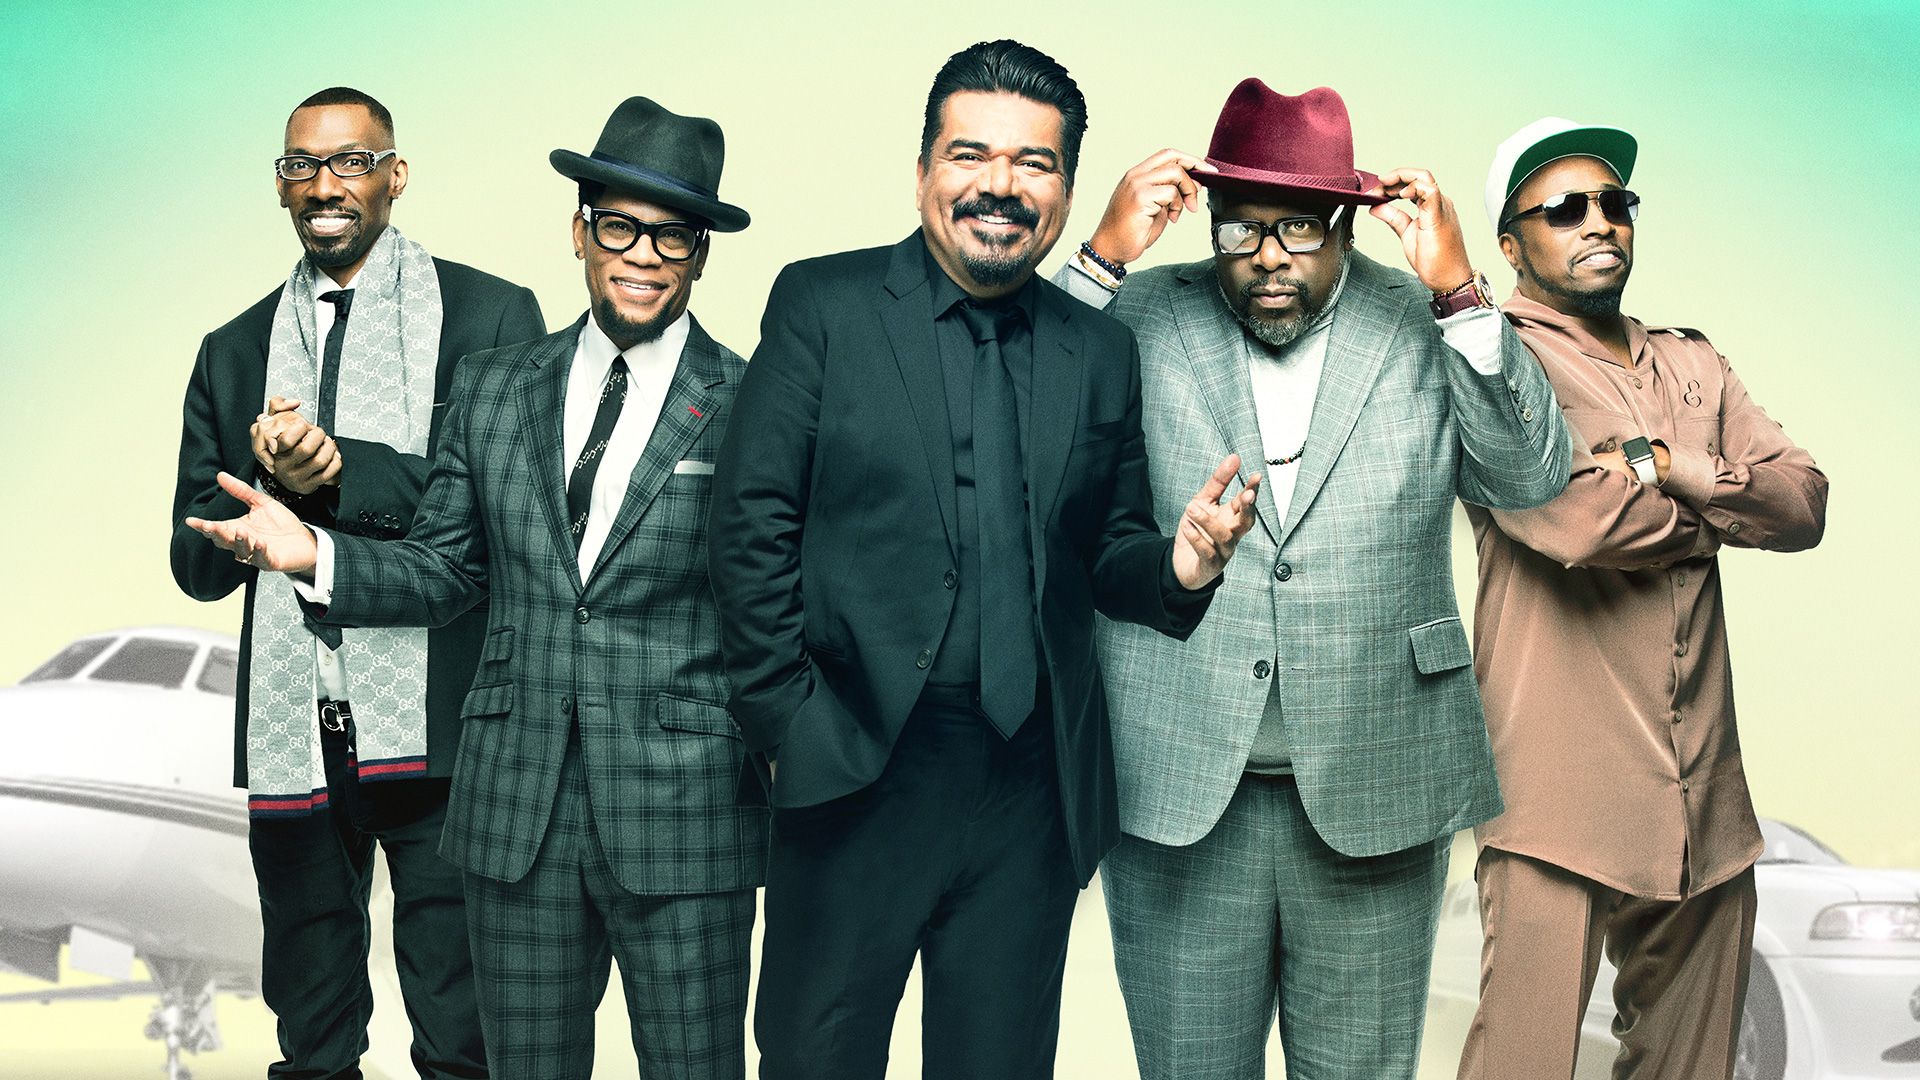 When Does The Comedy Get Down Season 2 Start On BET? Premiere Date